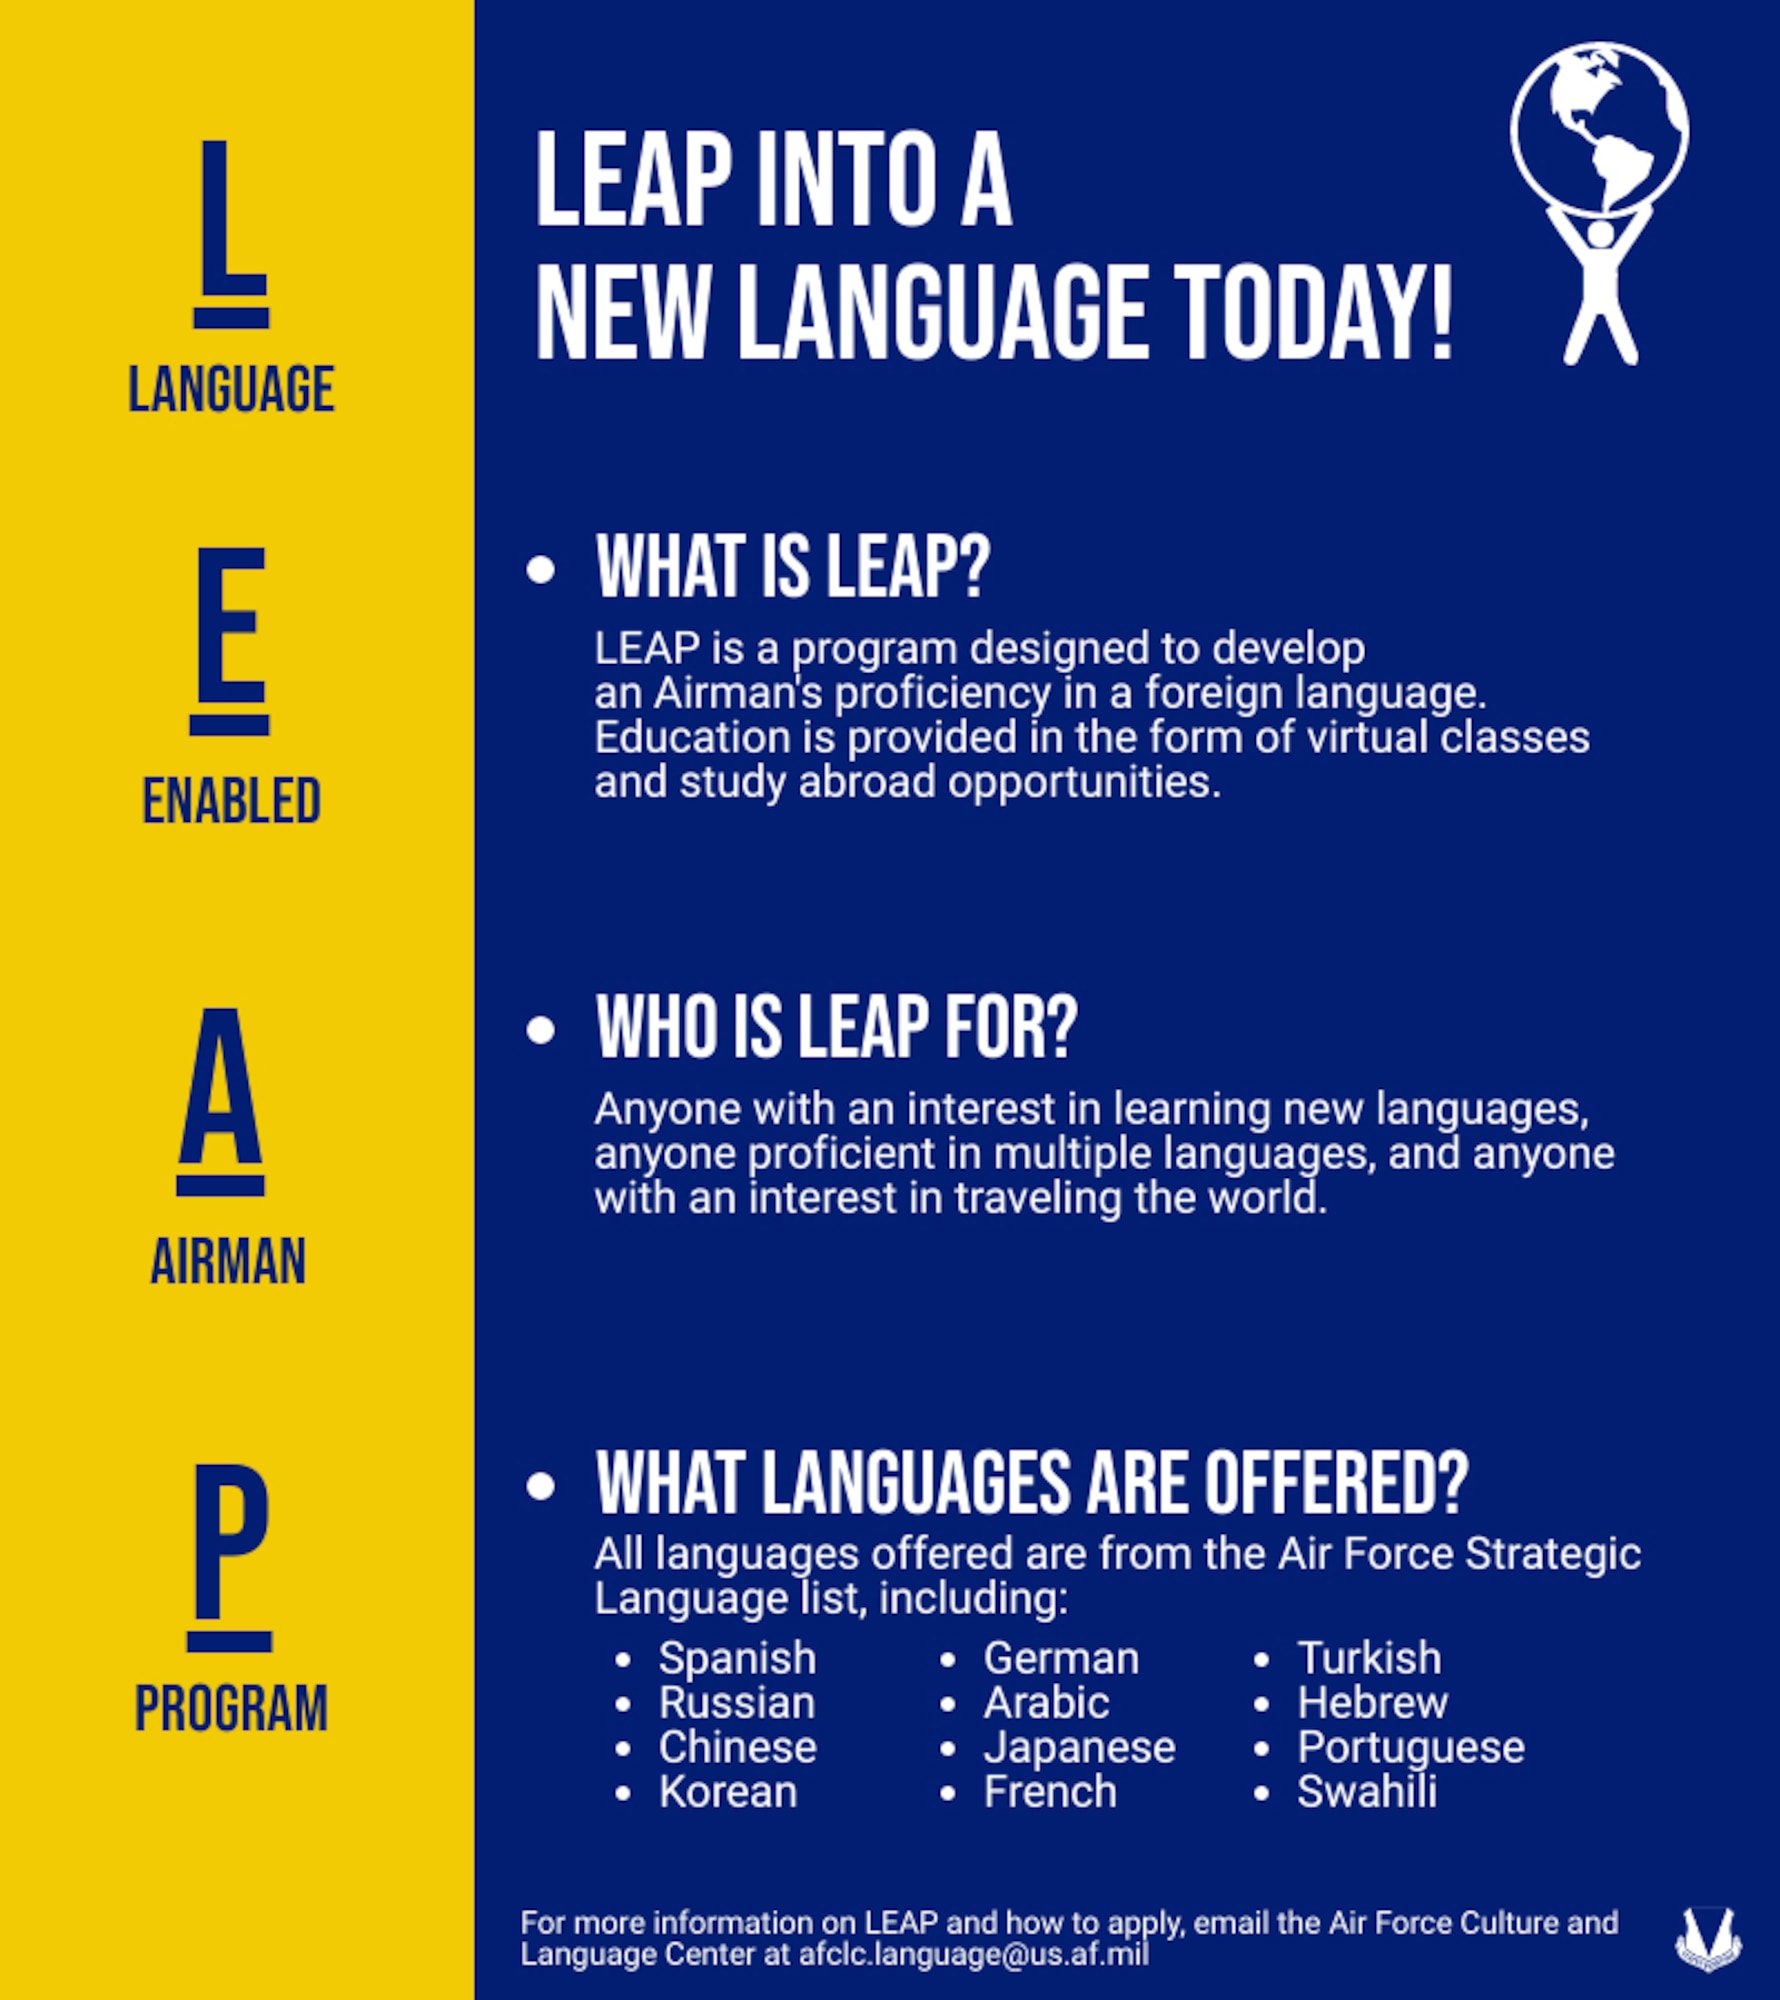 A graphic displaying information about the Language Enabled Airman Program.